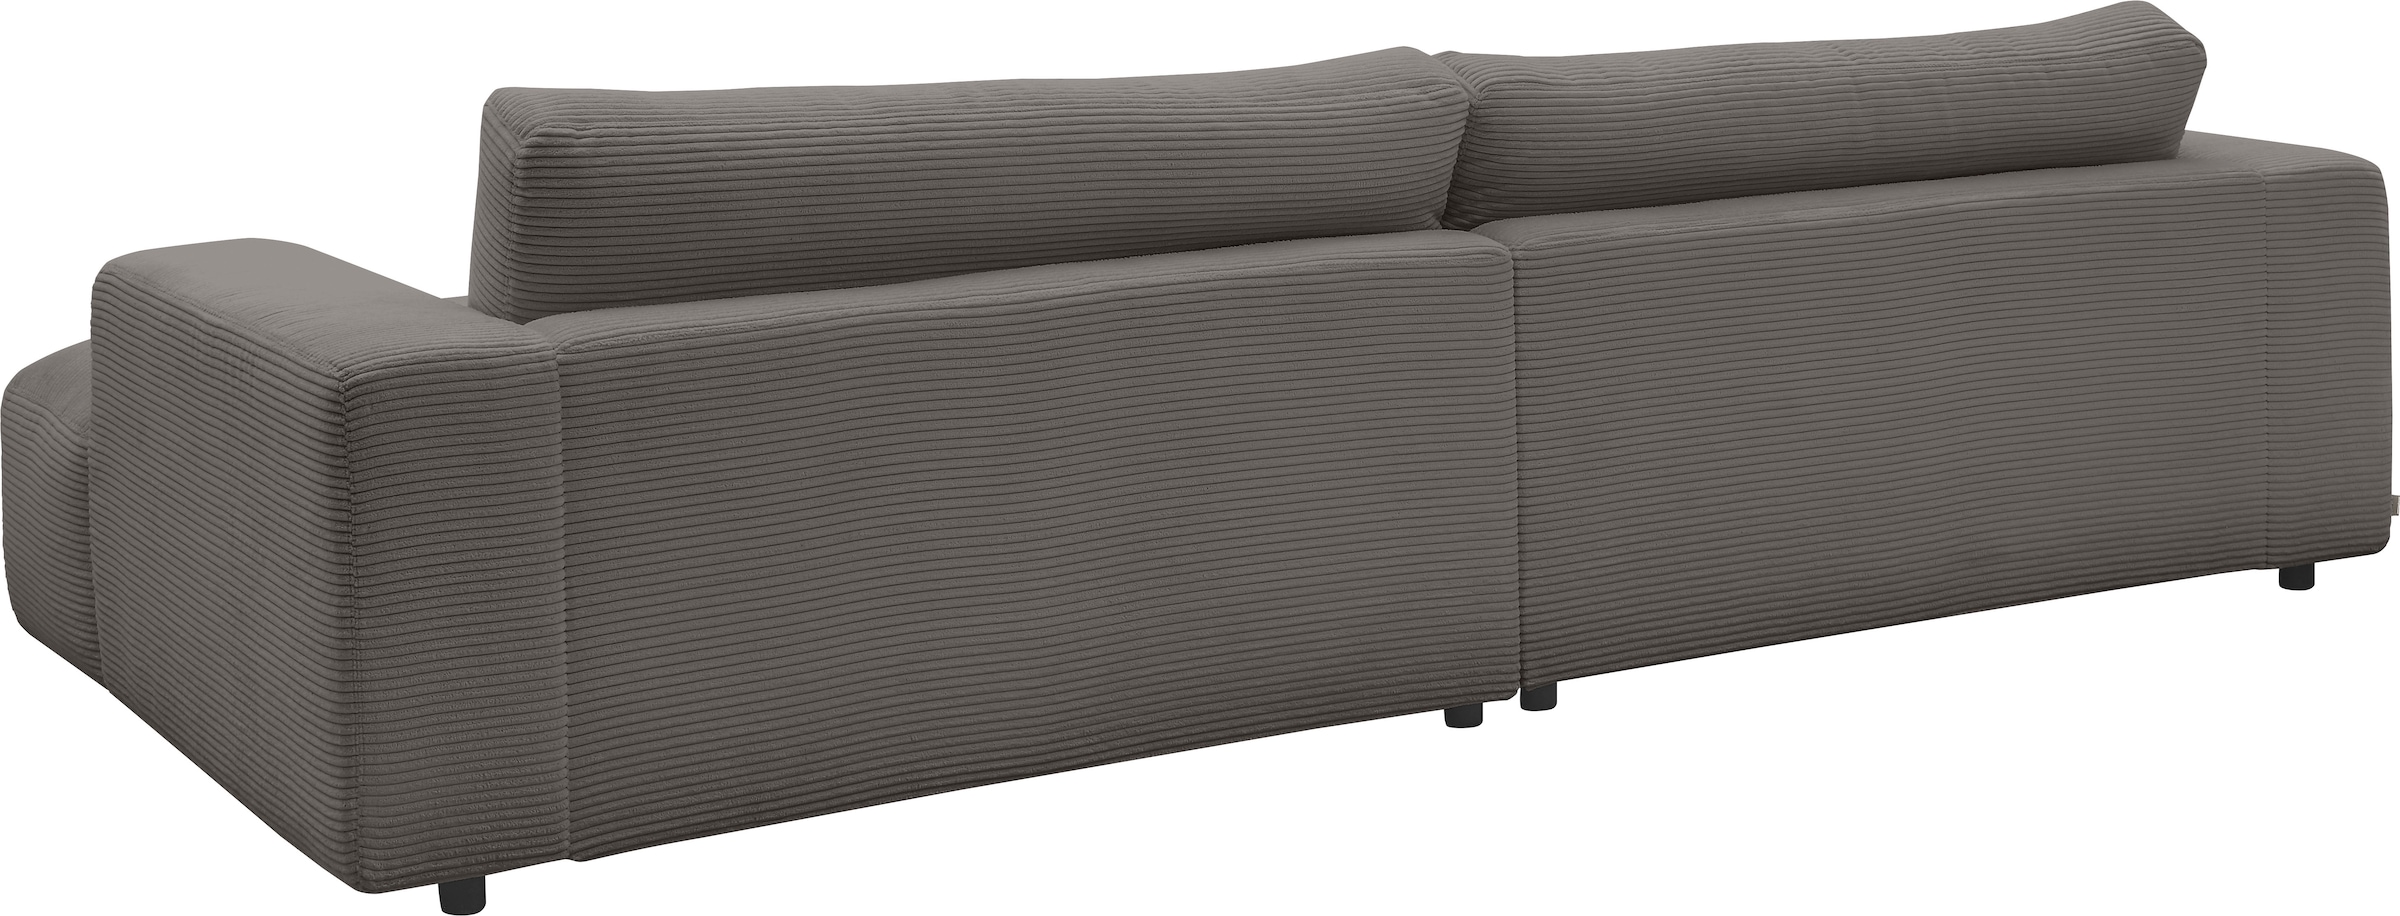 Shop 292 OTTO cm by GALLERY Breite branded Musterring »Lucia«, M Cord-Bezug, Loungesofa Online